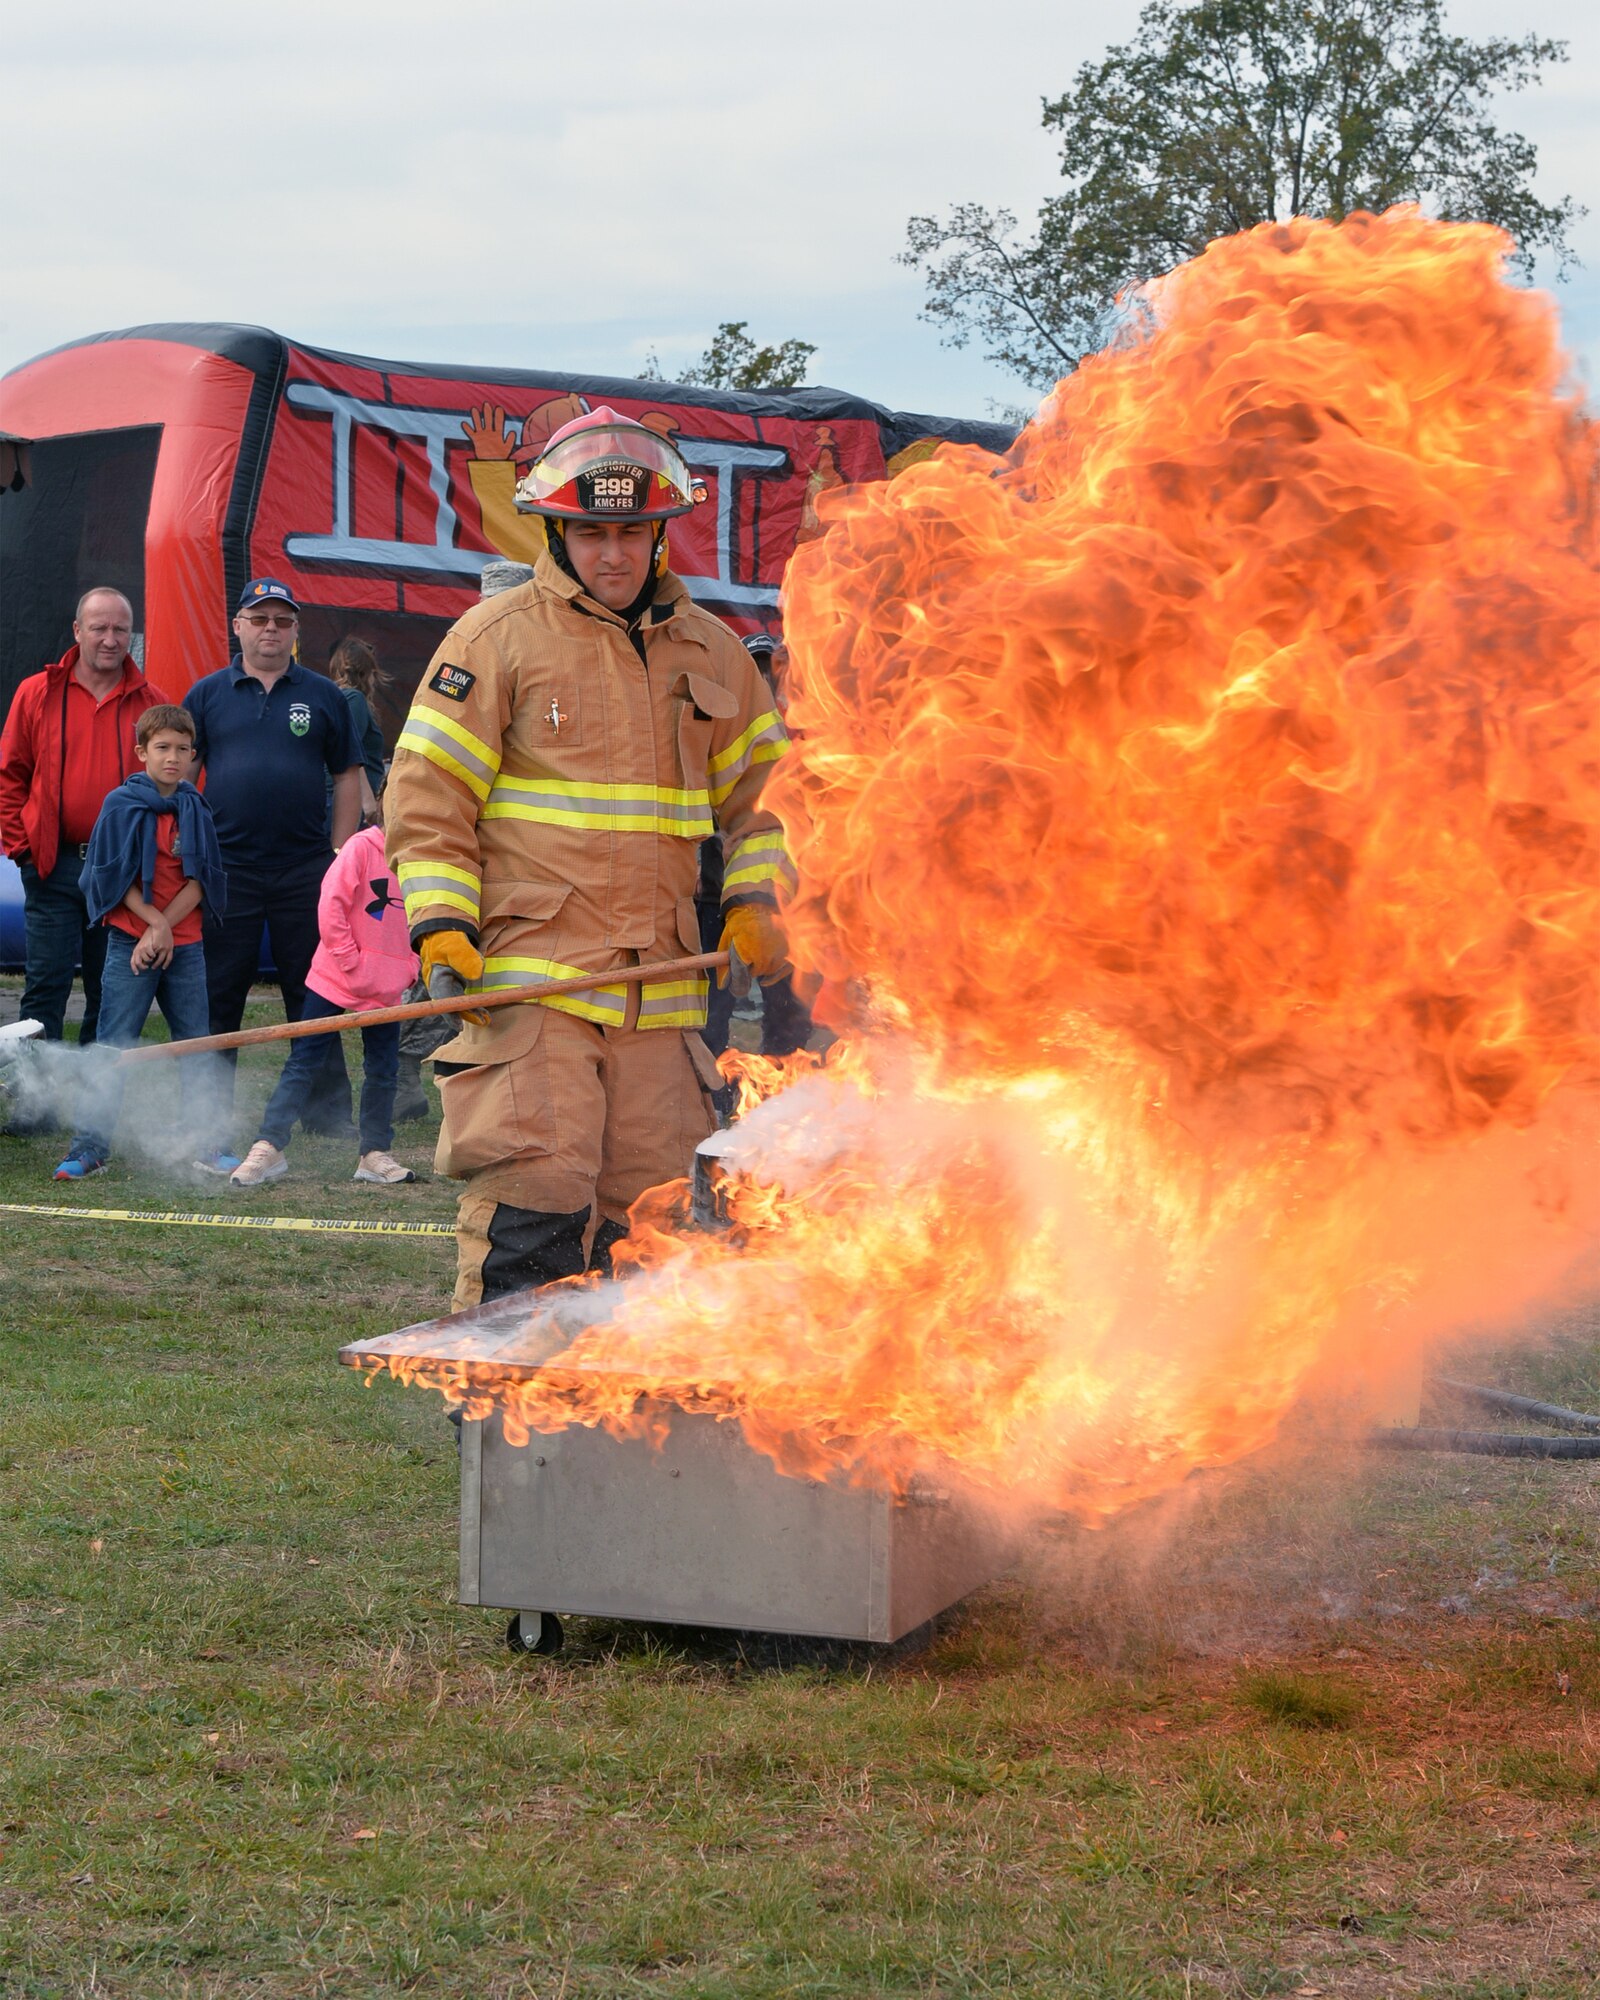 A firefighter with the Kaiserslautern Military Community Fire and Emergency Services demonstrates what happens when water is poured on a grease fire on Ramstein Air Base, Germany, Oct. 6, 2018. If a grease fire happens, the fire should be smothered by placing the lid on the pot or pan to prevent oxygen from feeding the flames. After a lid has been placed on the pot or pan, the fire department should be called. (U.S. Air Force photo by Staff Sgt. Jimmie D. Pike)